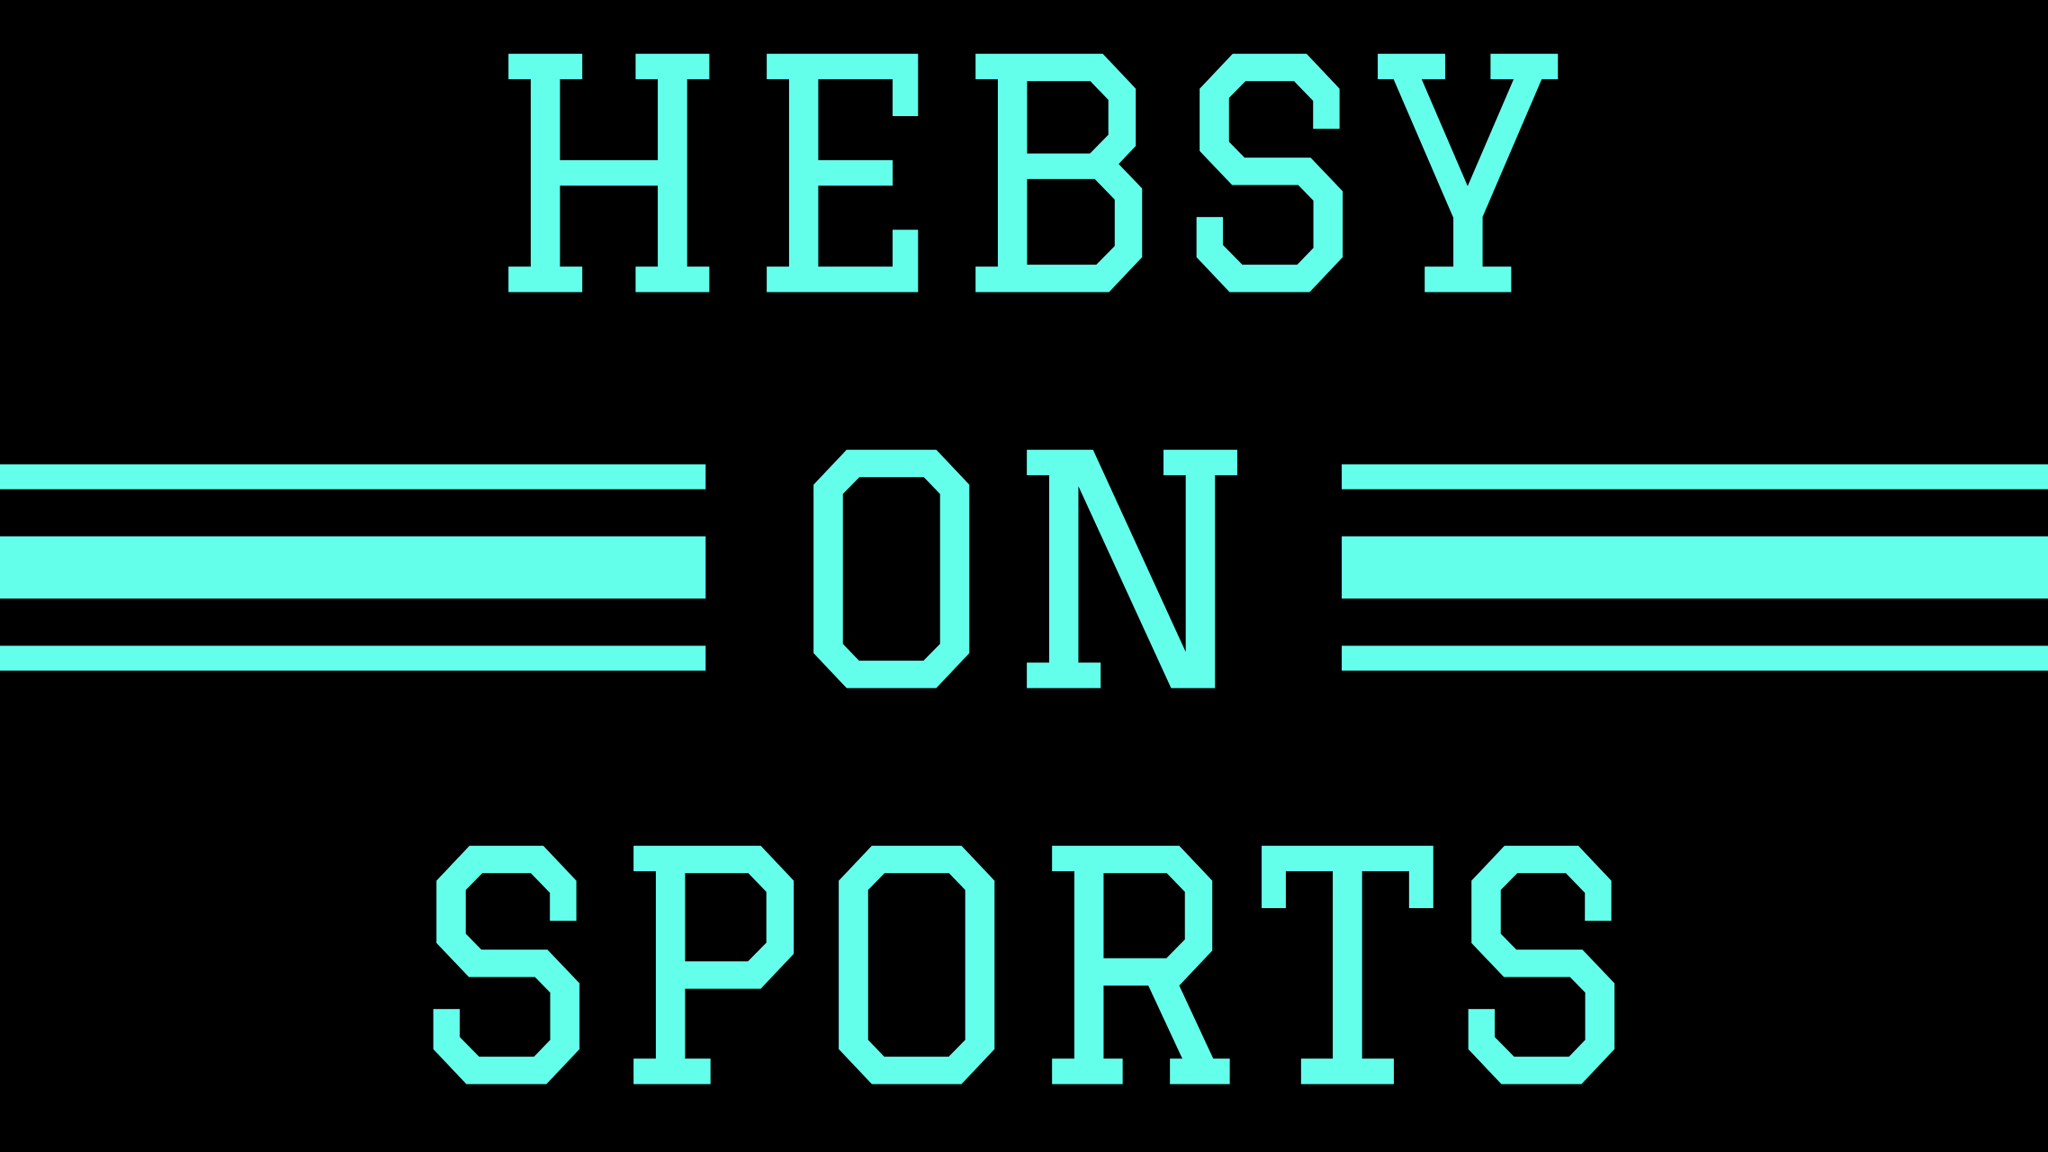 Hebsy on Sports for December 3, 2021